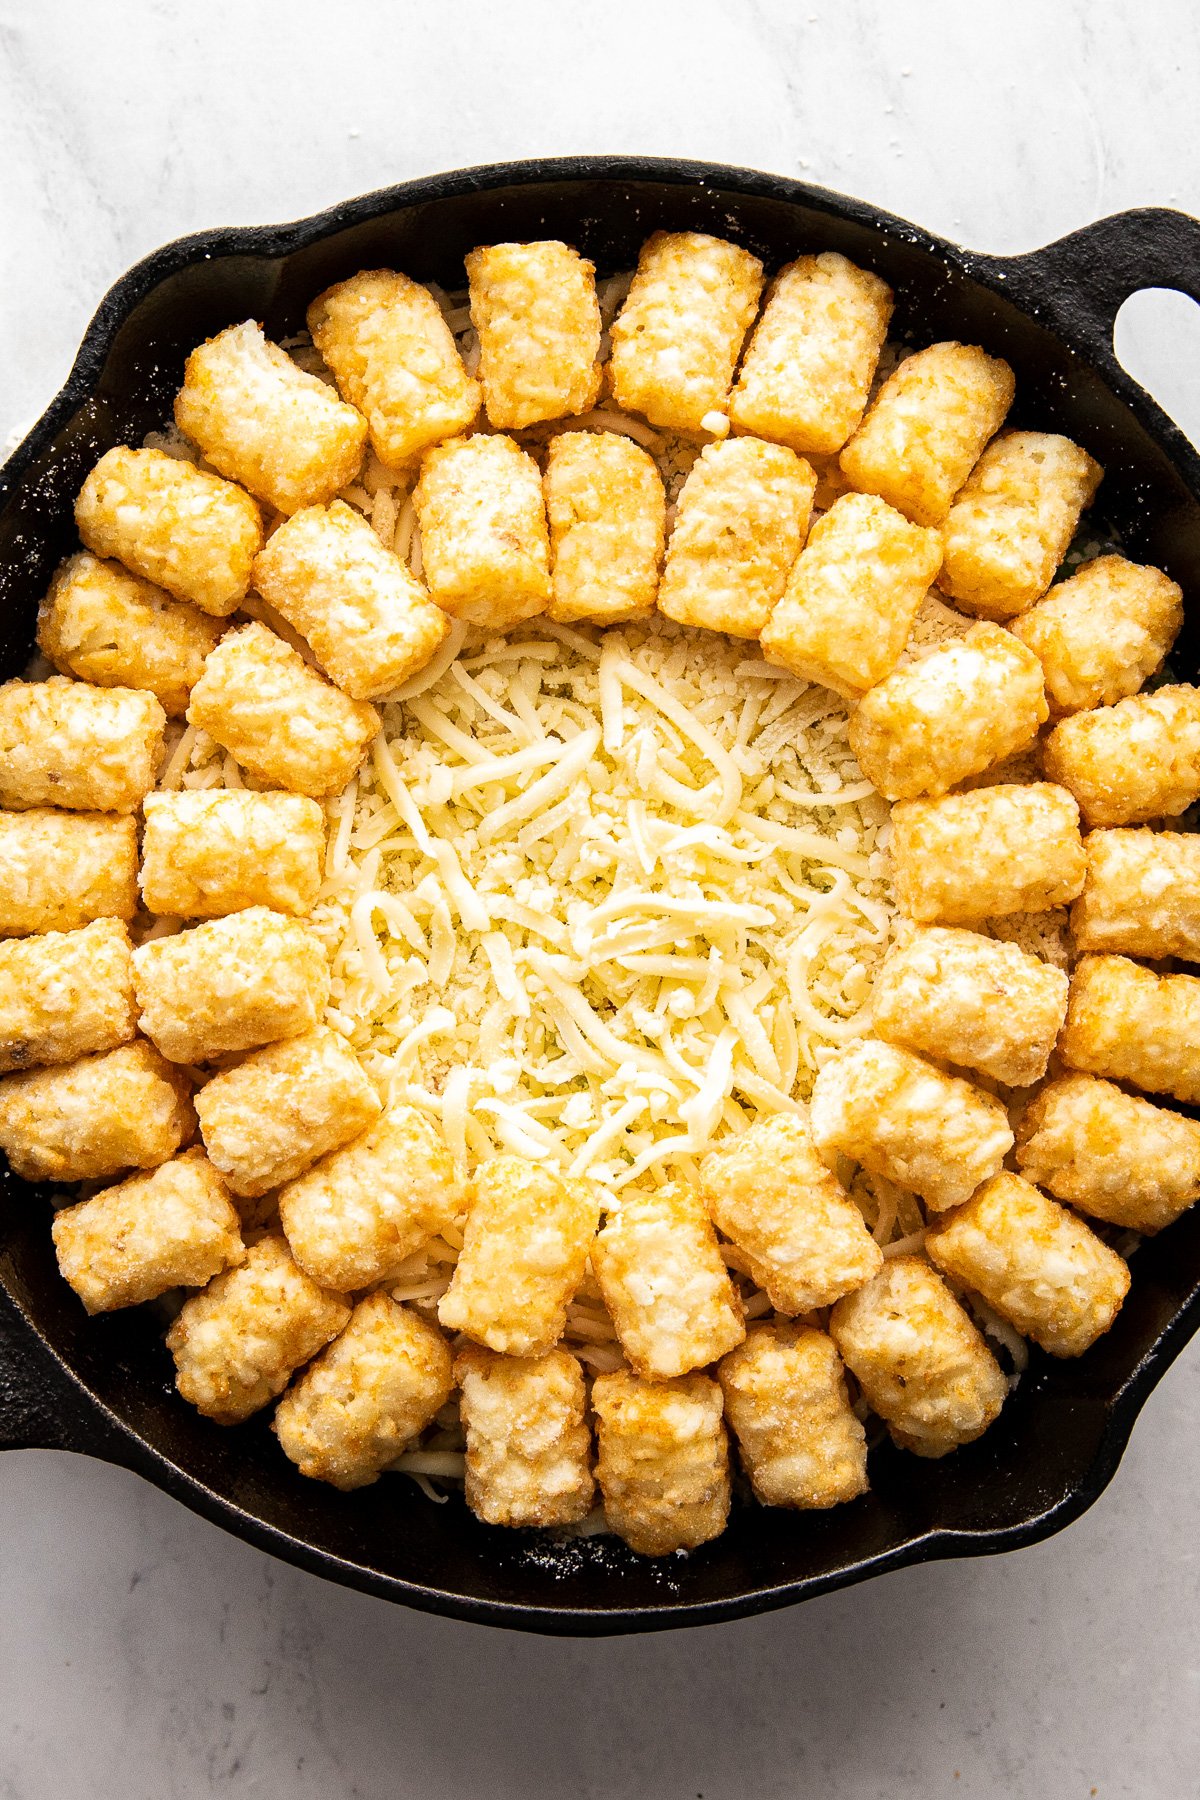 Tater tots in second circle around hotdish in skillet.